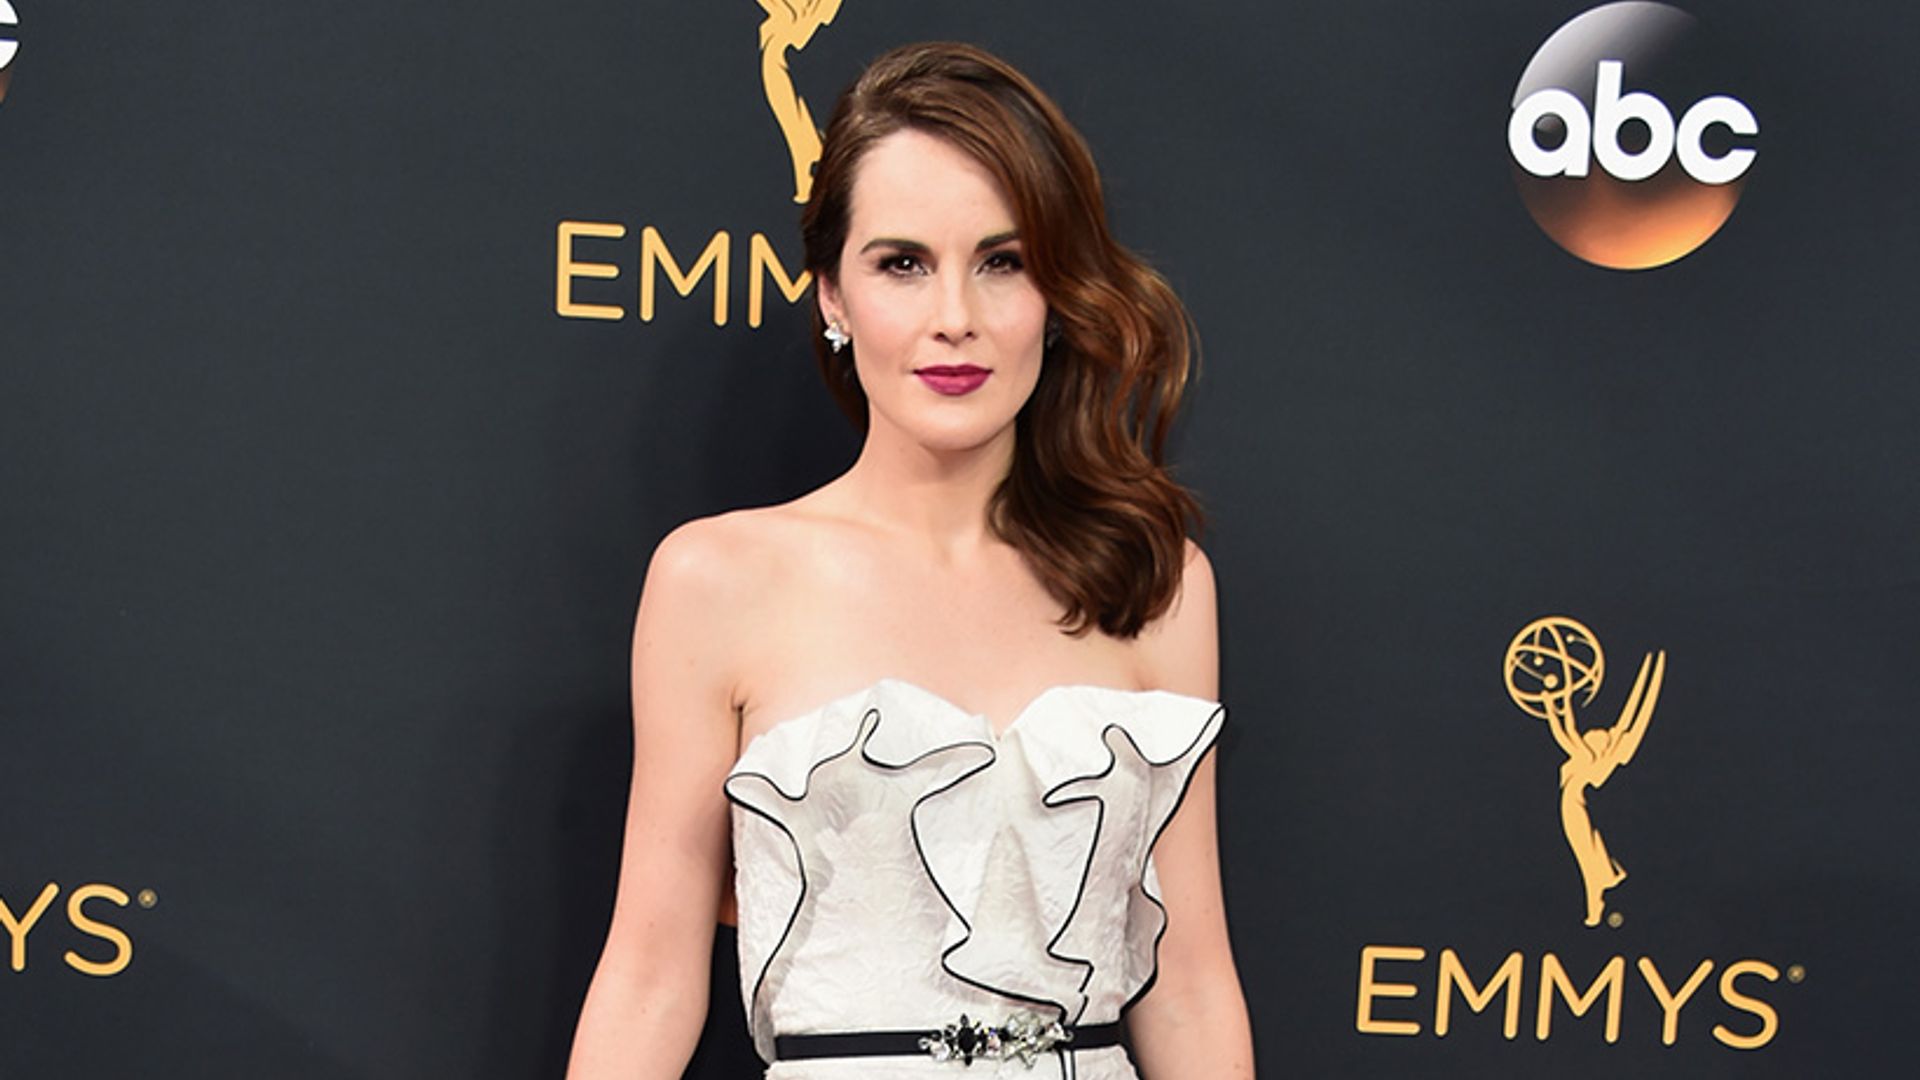 Michelle Dockery shares first look at Downton Abbey film